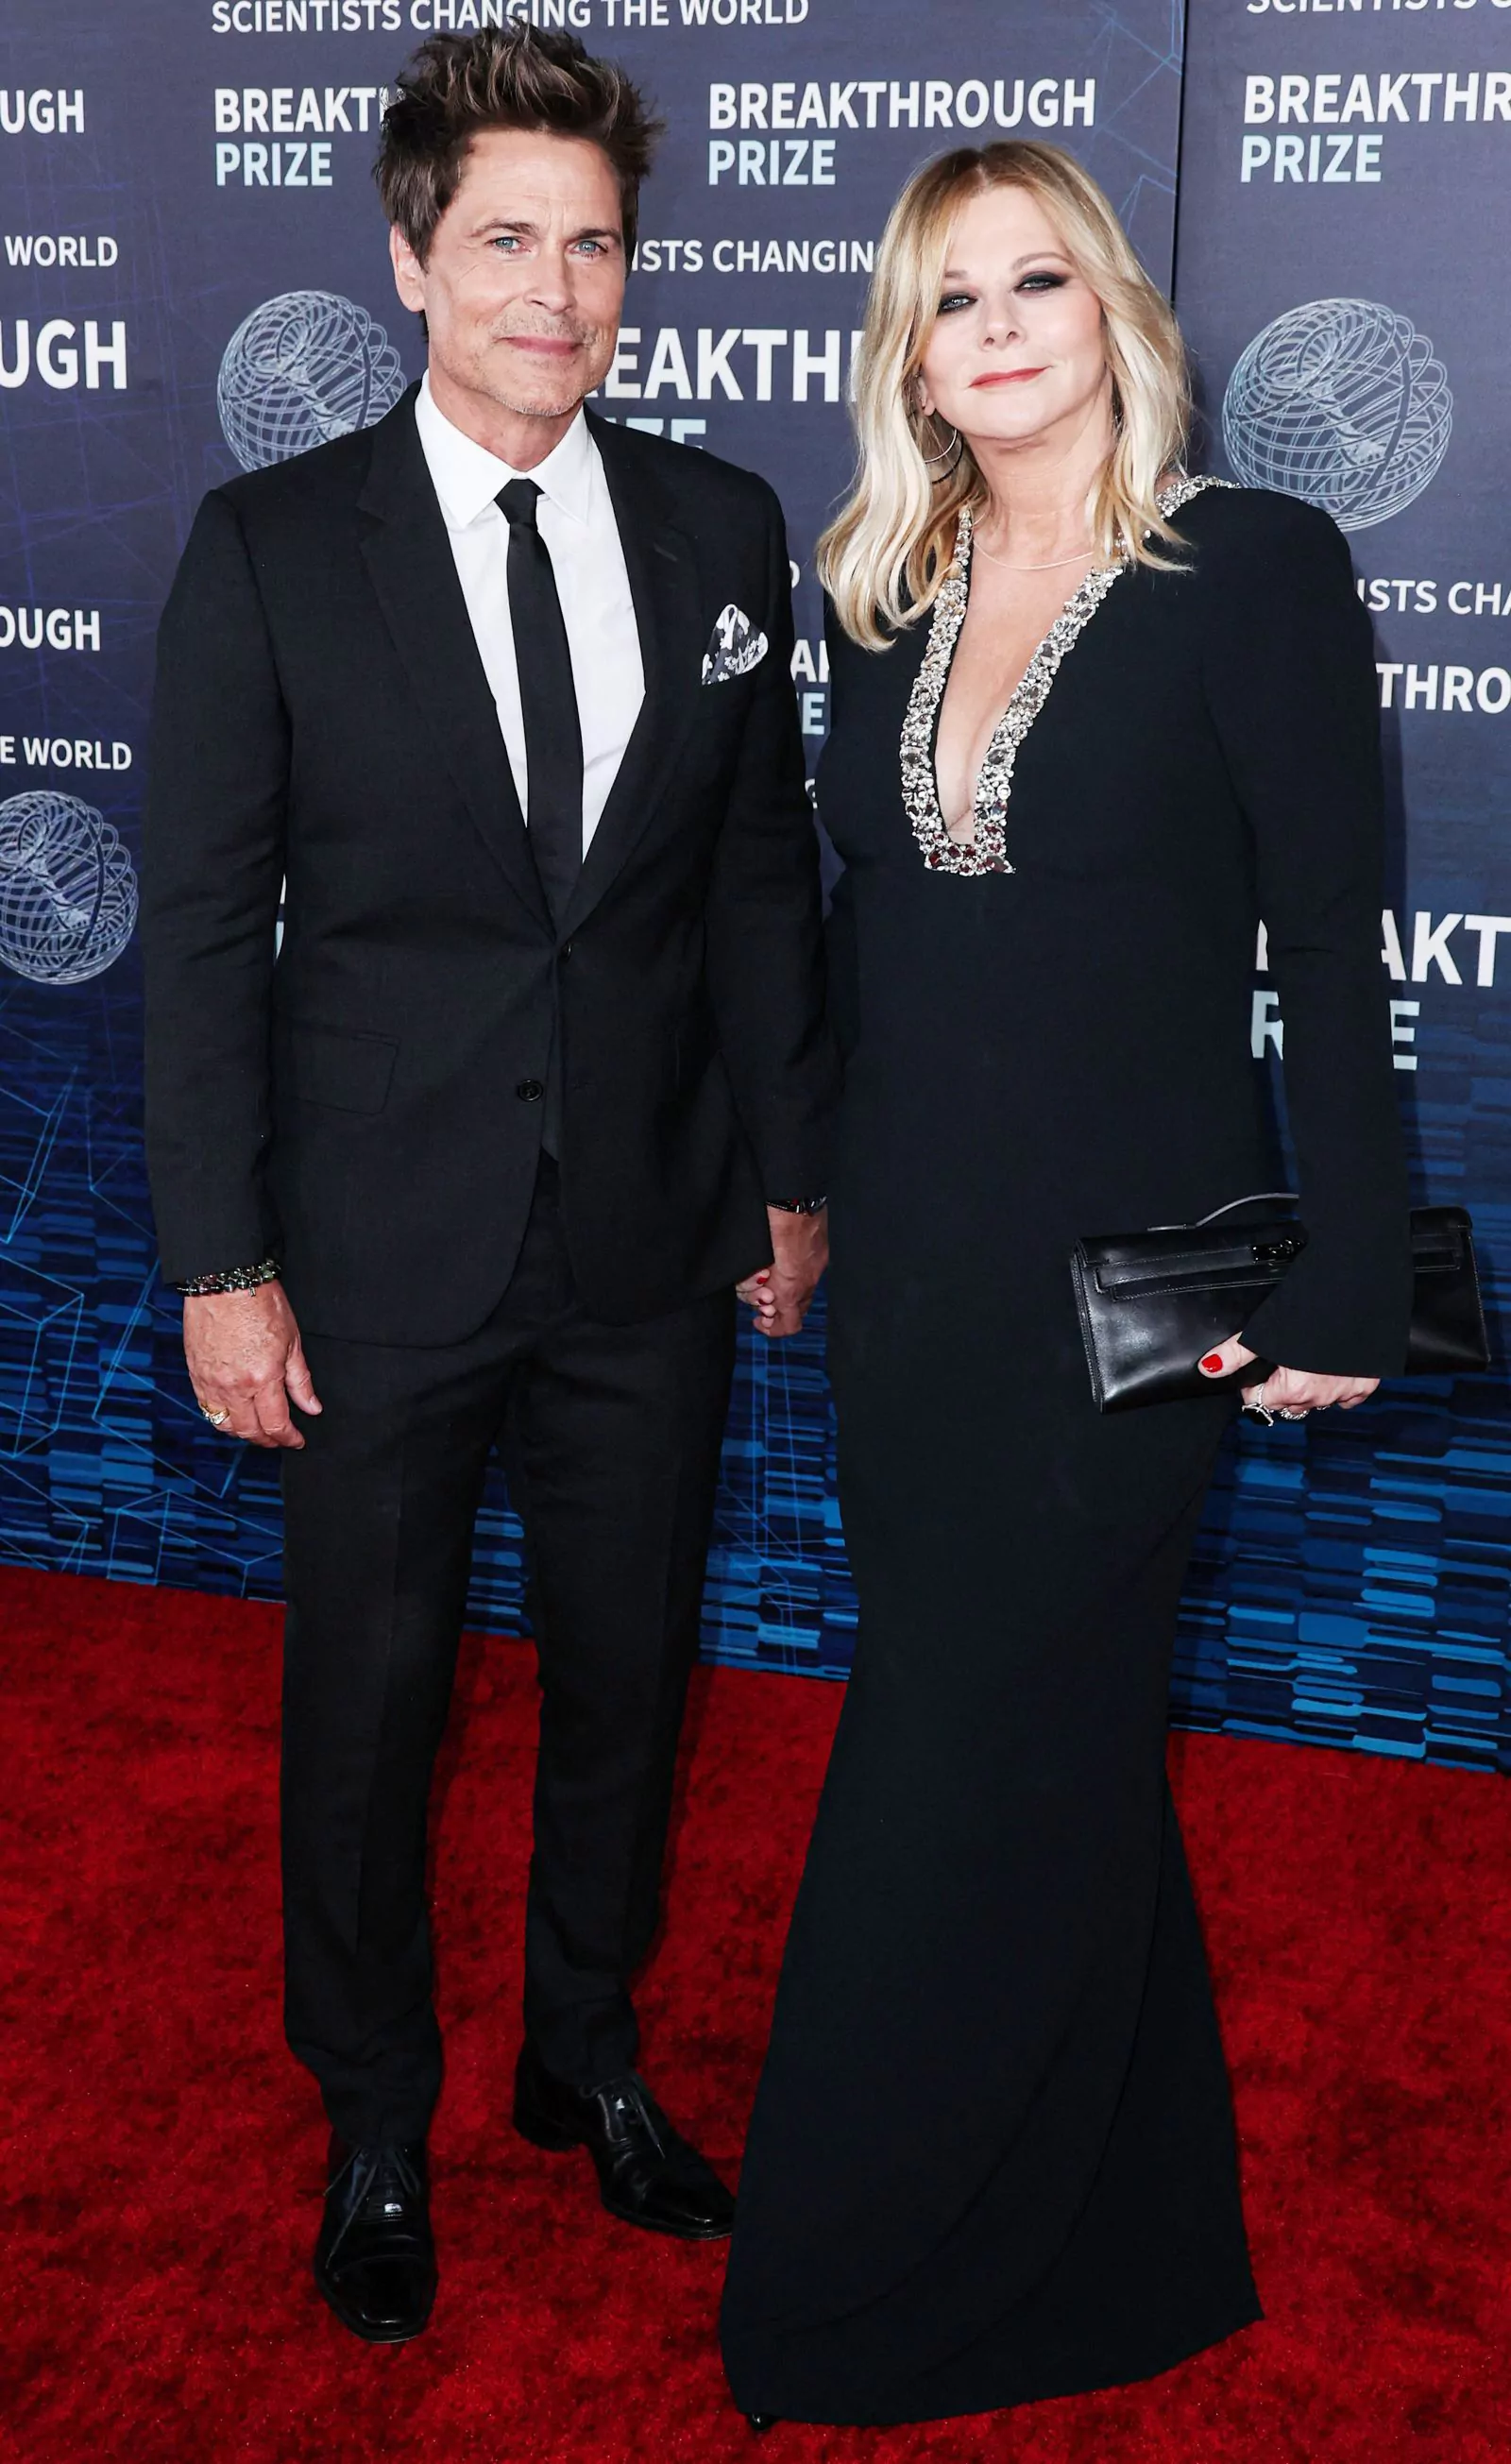 Rob Lowe with wife Cheryl Berkoff at the 9th Annual Breakthrough Awards in Los Angeles on April 15, 2023.